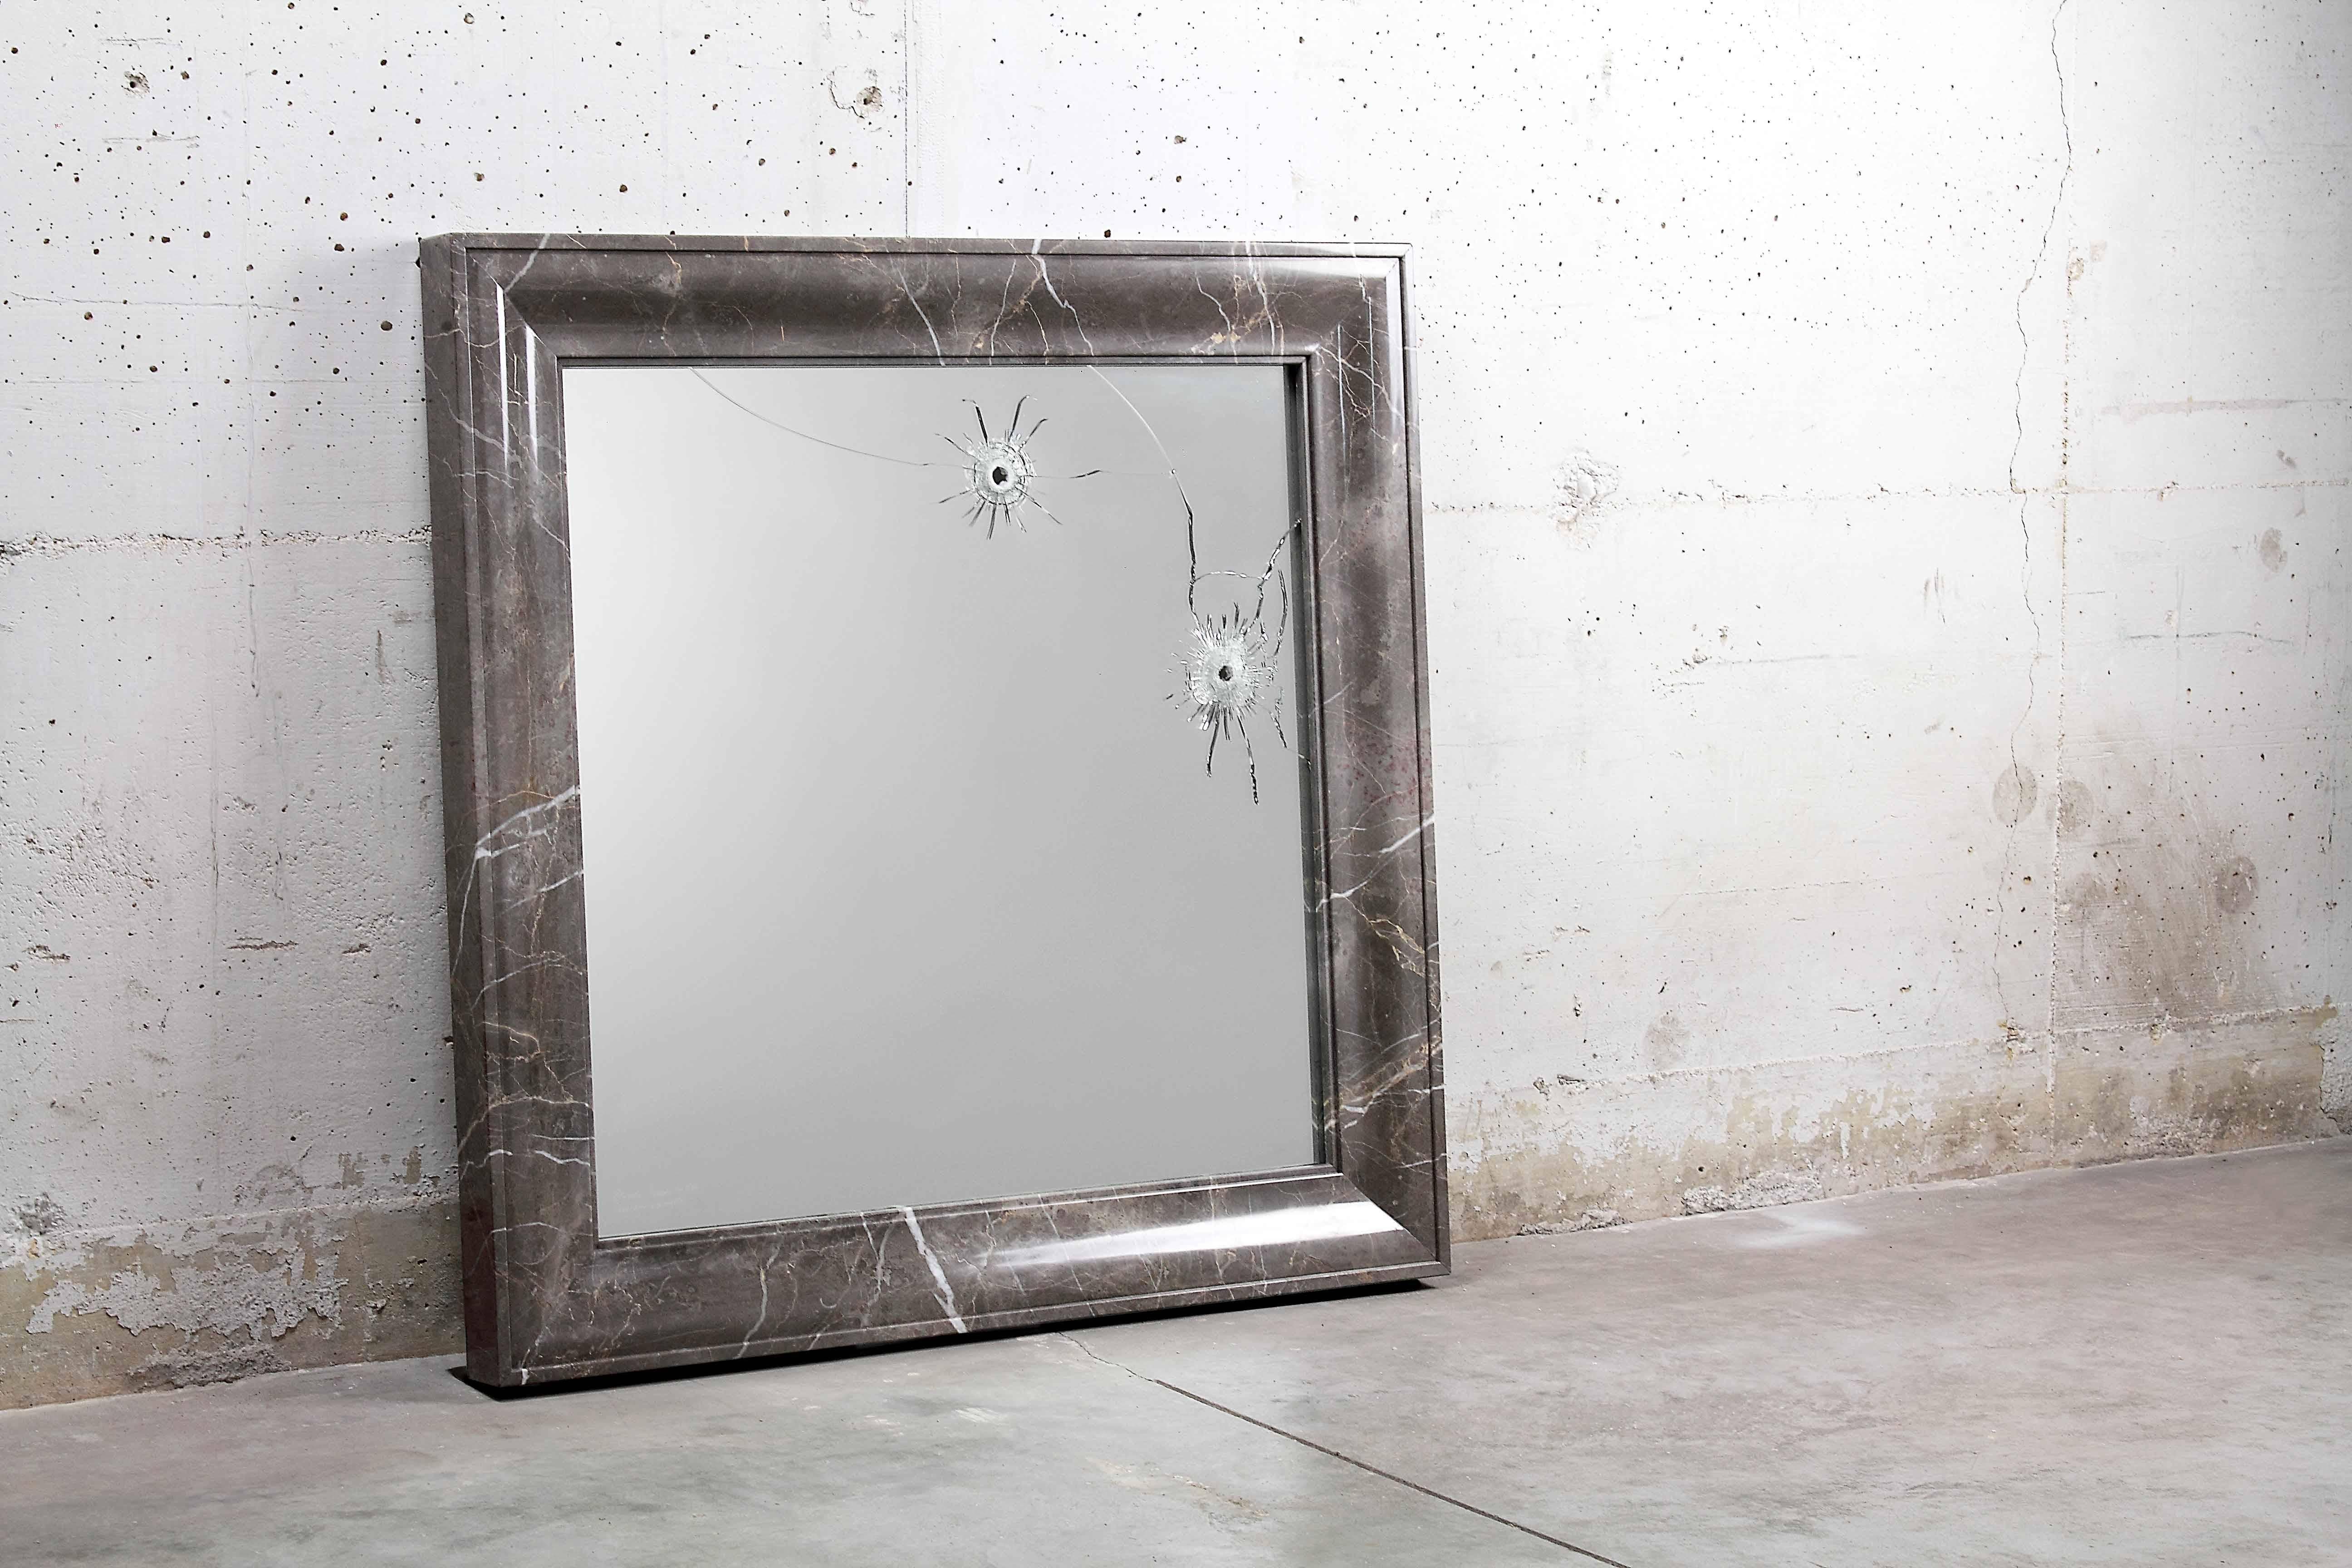 The 'Seven Years' wall mirror is made of security-glass, mirror hit by gunshots and frame in polished Imperial grey Marble.

Mirror dimension: L 85 x W 85 cm. Dimensions are customizable.

Limited Edition of 15.

Each mirror is hand signed by the